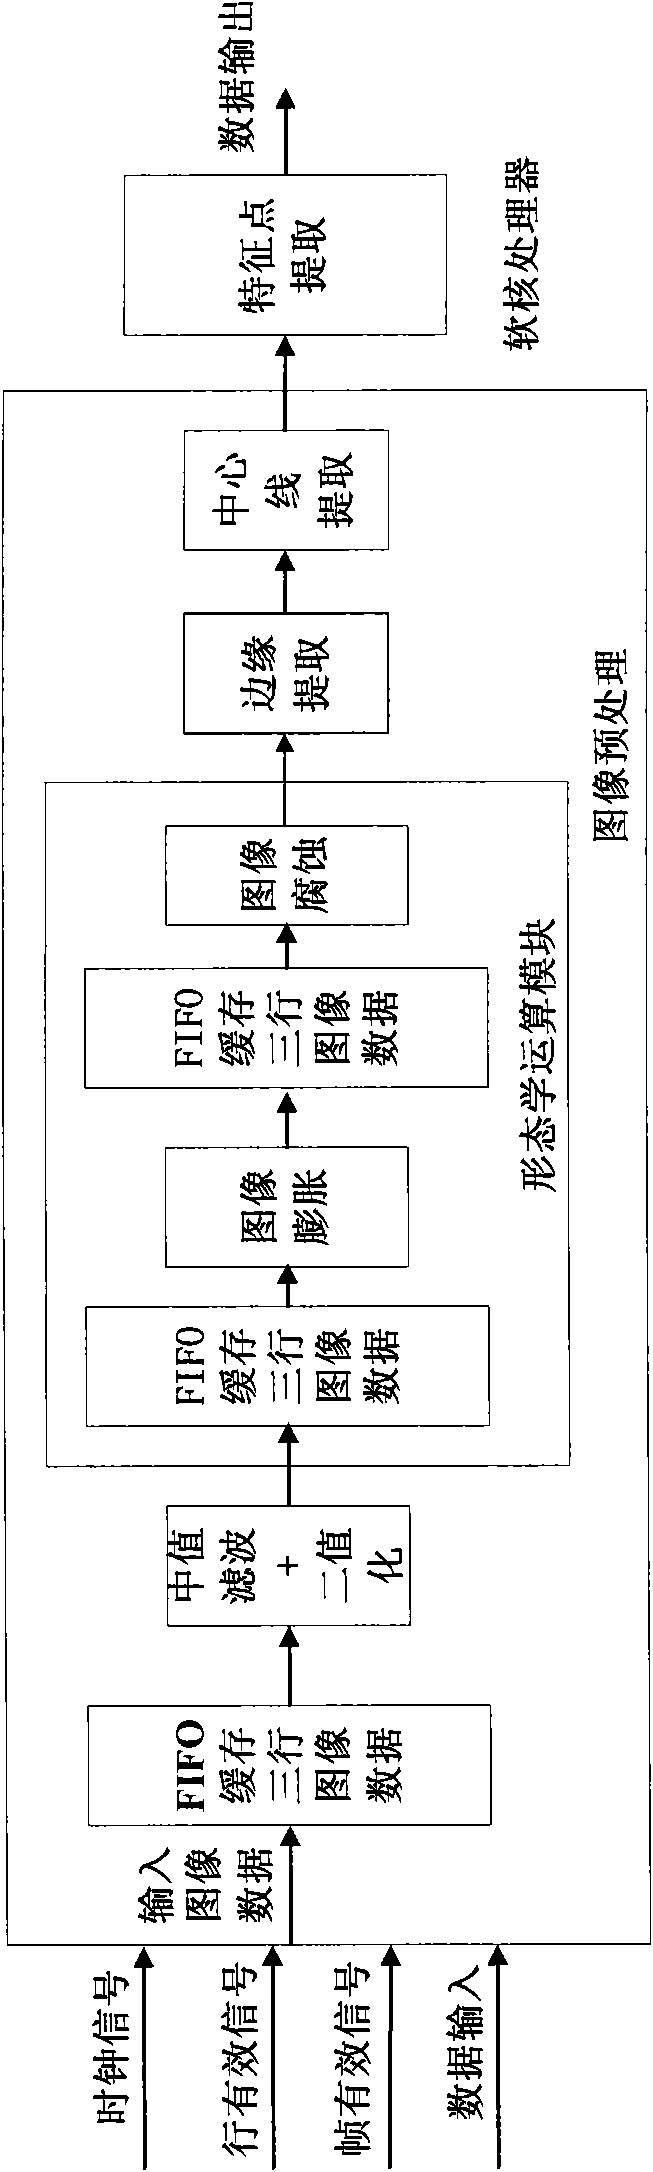 Rapid extracting method for structure light welding seam image characteristic points